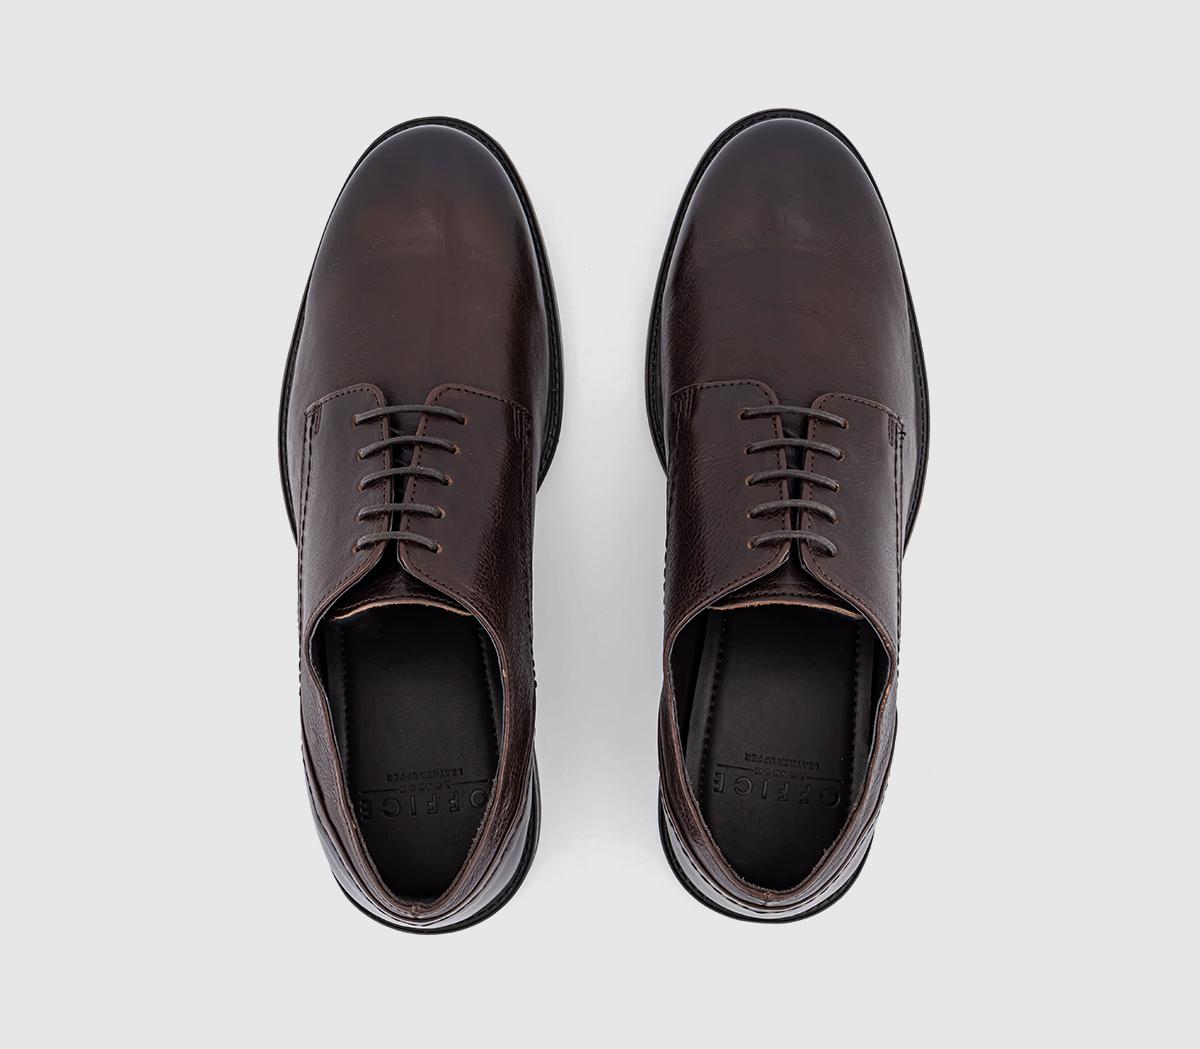 OFFICE Cadeleigh Casual Leather Derby Shoes Brown Leather - Derby Shoes